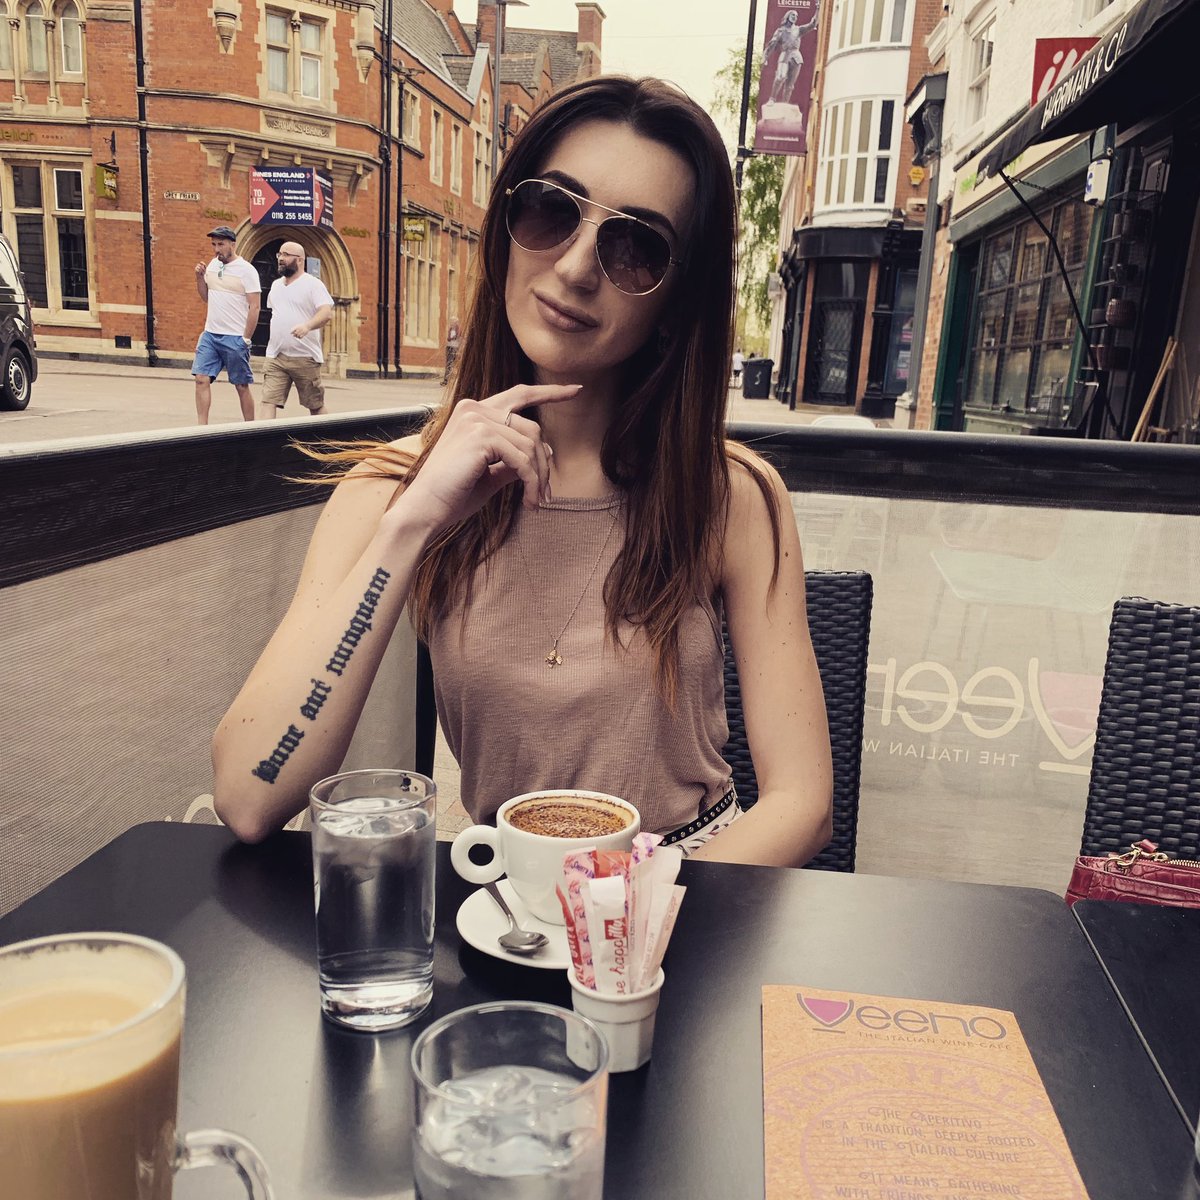 Some delicious coffee with my bestie @veeno_leicester #beyourself #englishstyle #picsart #afternoon #coffee #cappuccino #pics #instamood #instaday #view #sunny #weather #likes #positive #vibes #uk #leicester #foodie #girls #bodypositivity #together #friends #friendshipgoals